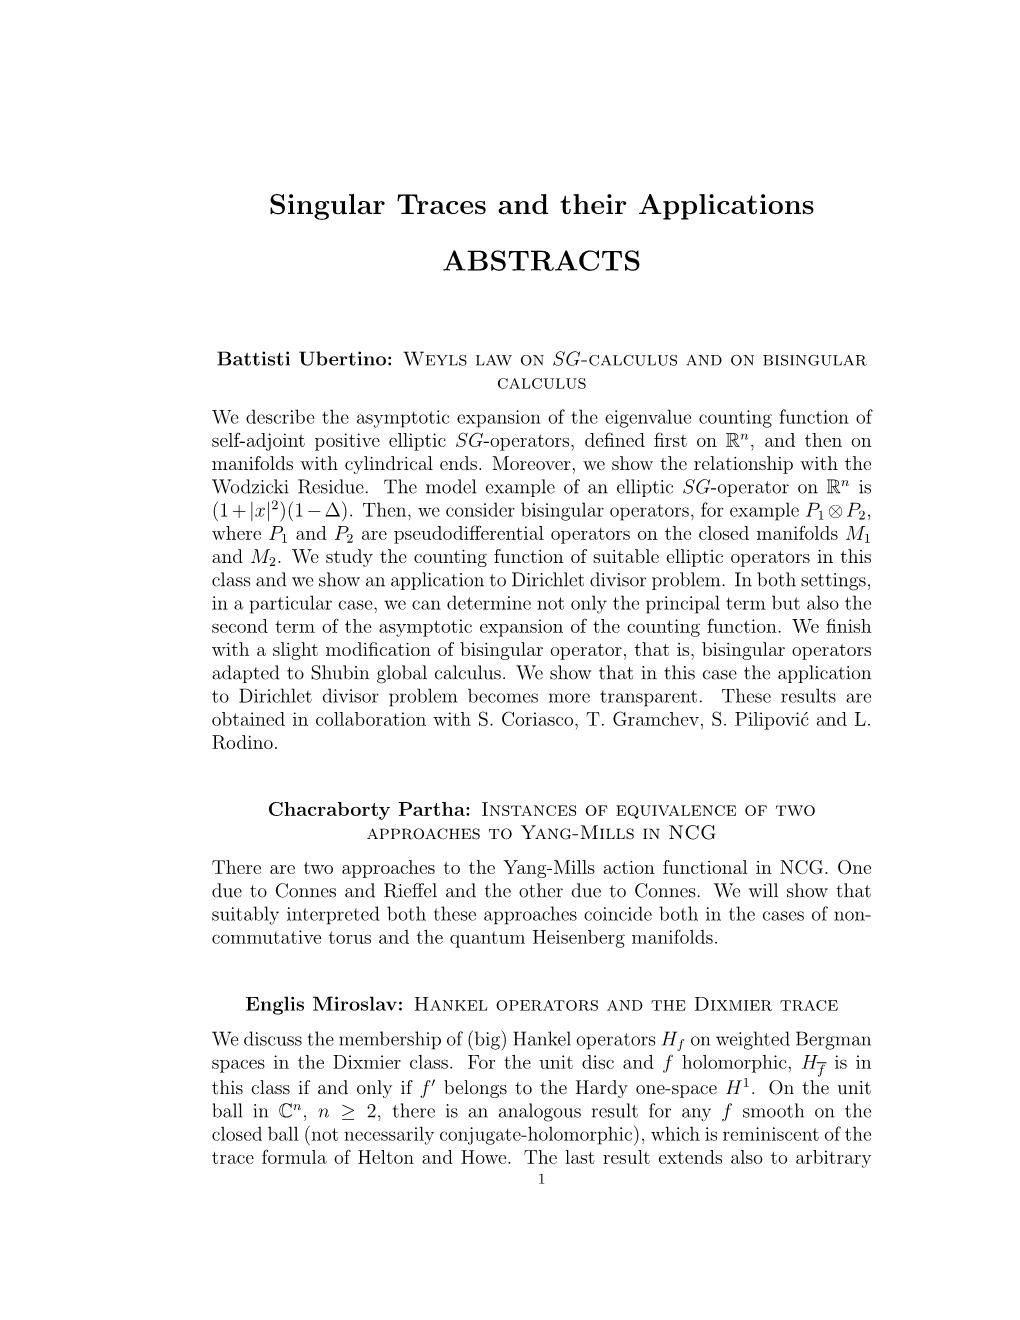 Singular Traces and Their Applications ABSTRACTS